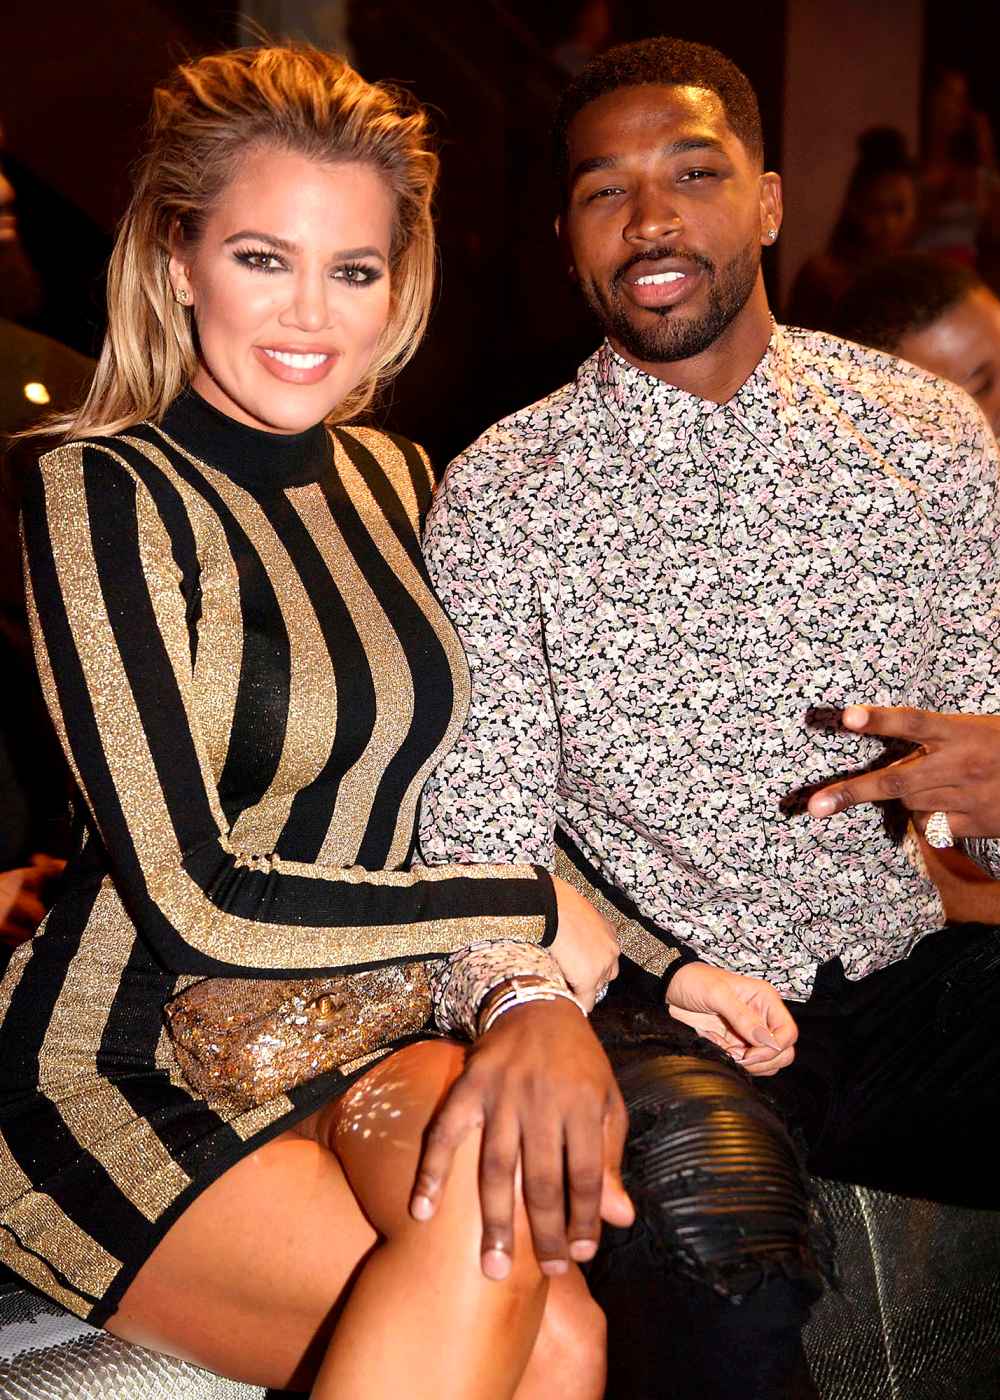 Khloe Kardashian and Tristan Thompson Will Be ‘Co-Living Together’ After Athlete Signs Boston Celtics Deal